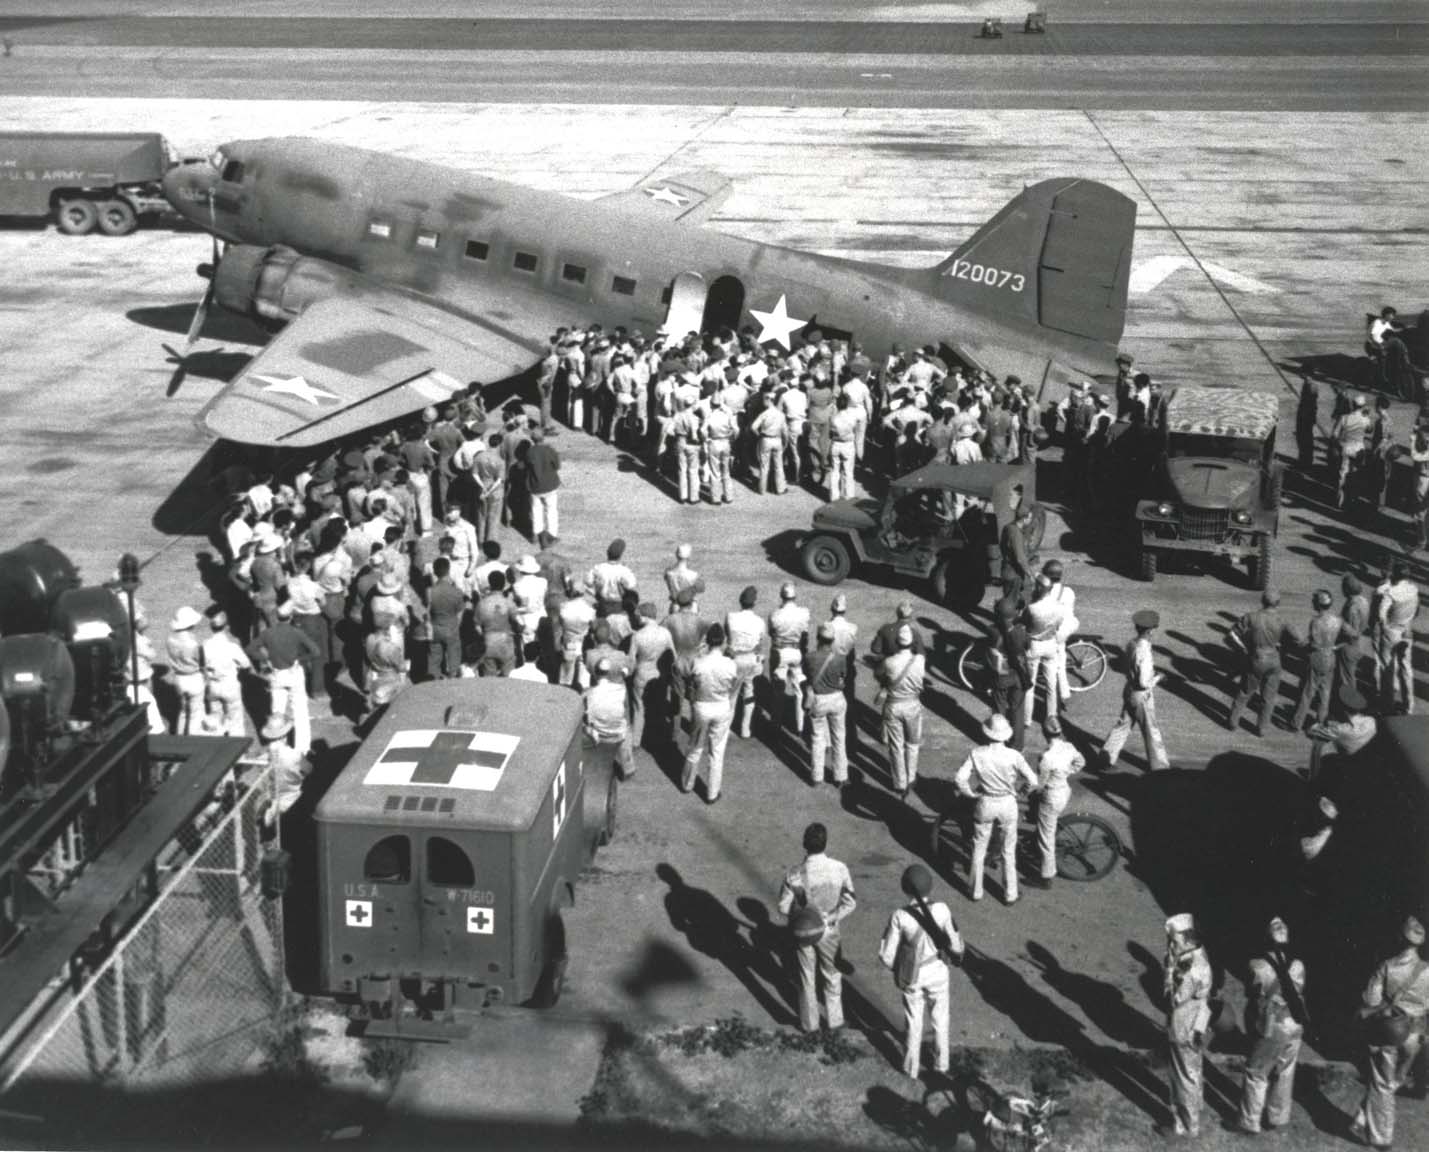 Wounded from Battle of Midway being offloaded from a C-53 variant of C-47 aircraft at Hickam Field, Oahu, US Territory of Hawaii, 7 Jun 1942; note Jeep and WC-9 ambulance